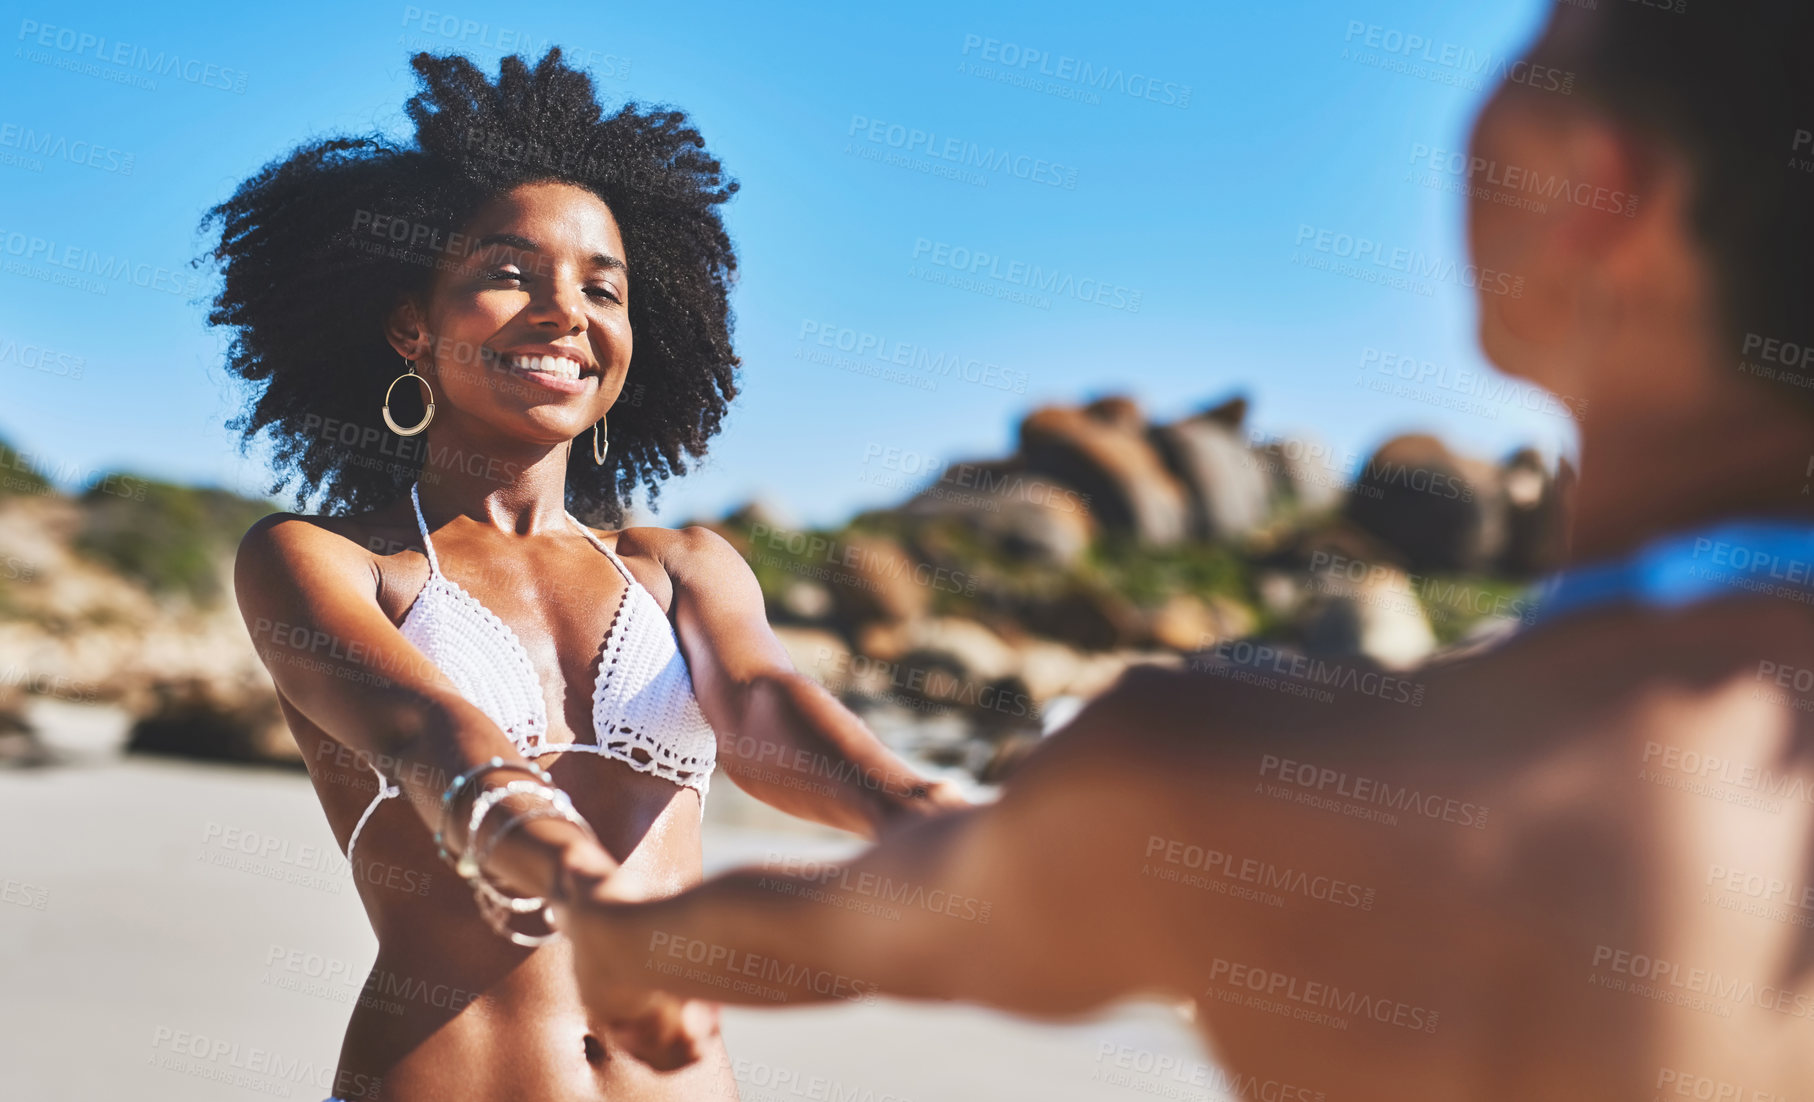 Buy stock photo Shot of two young women enjoying a playful moment on the beach